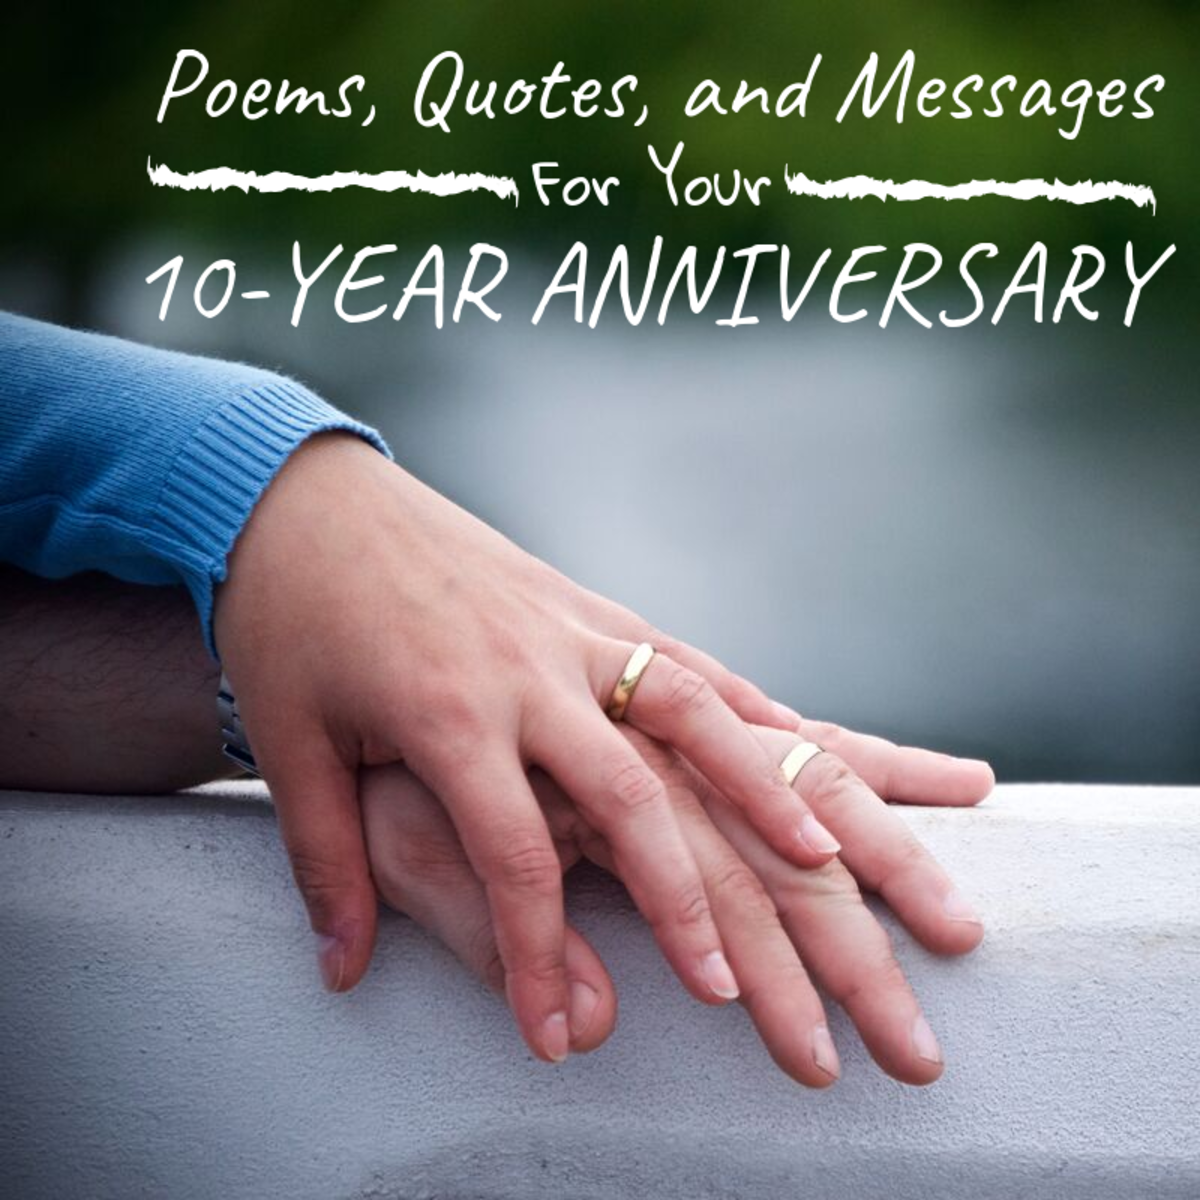 10th Anniversary Wishes, Quotes, and Poems to Write in a Card | Holidappy